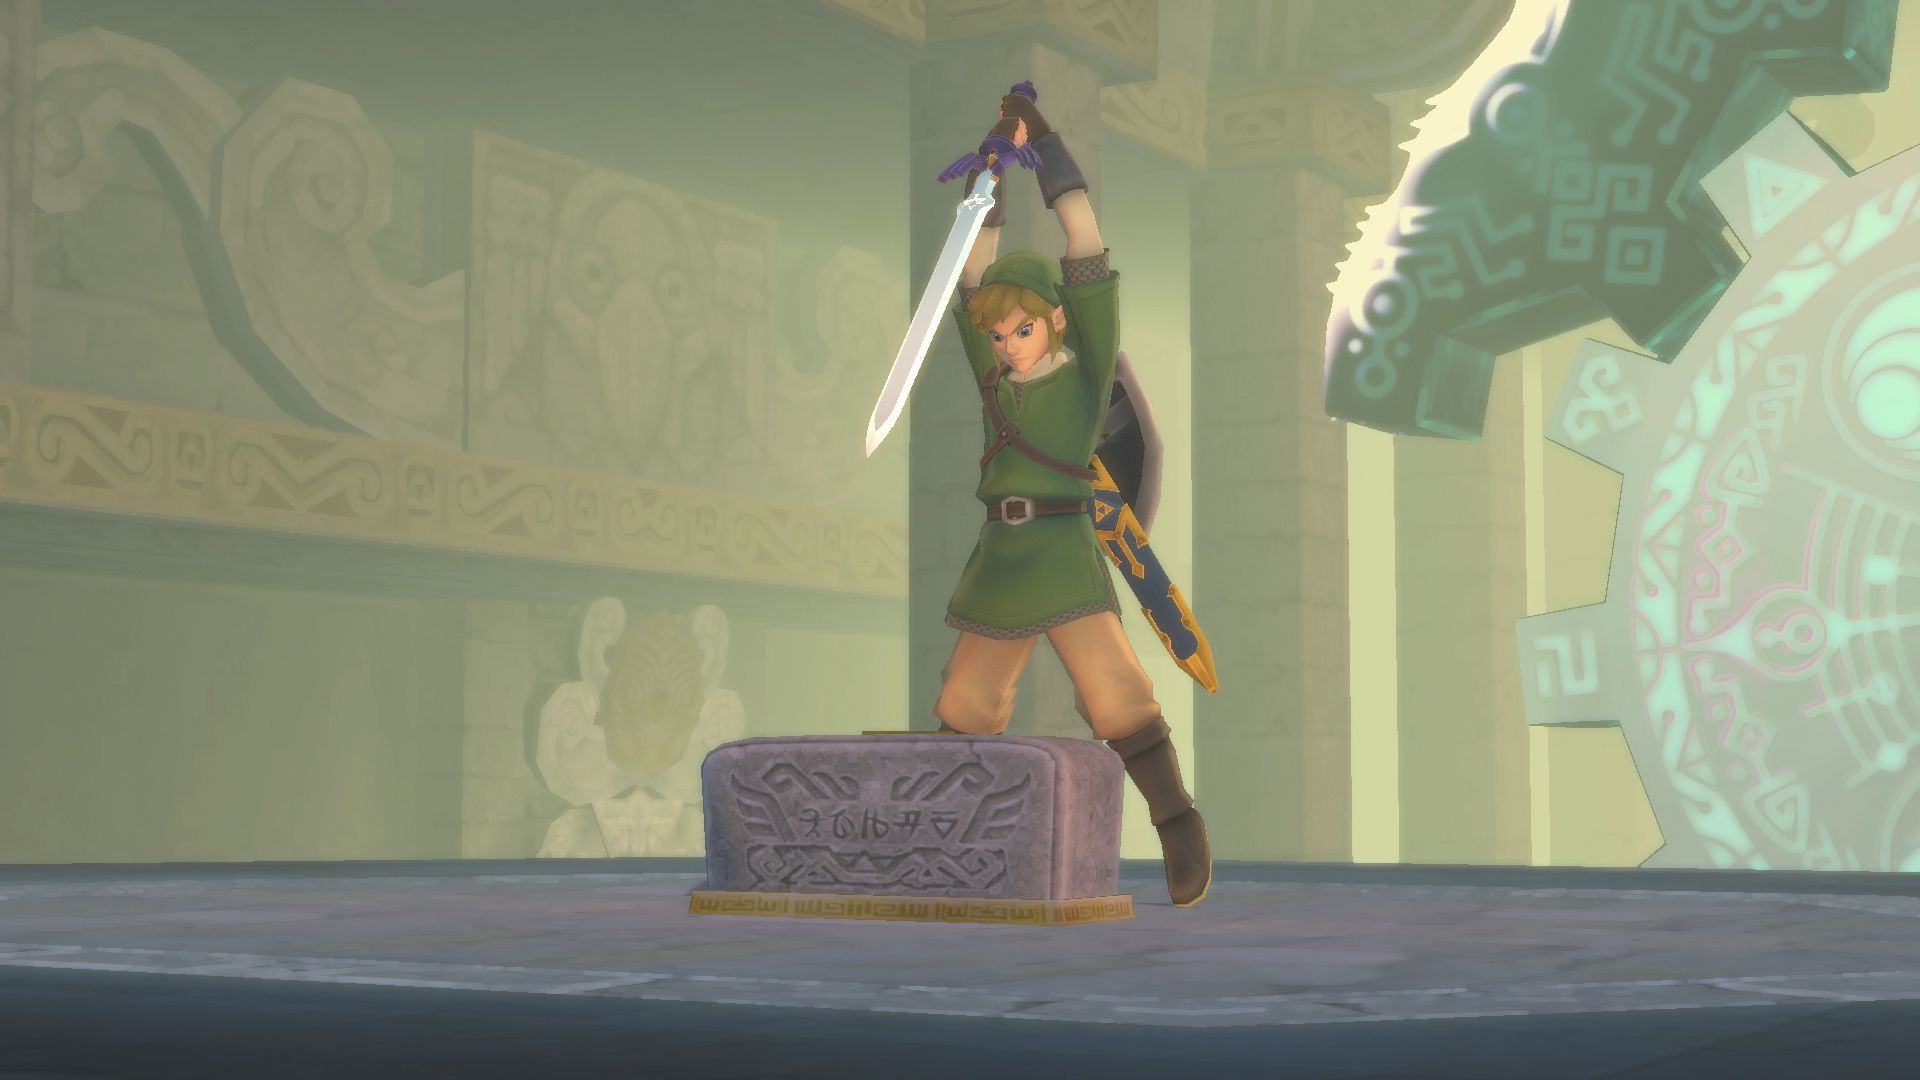 Screenshot from the Legend of Zelda showing a character raising a sword over a chest